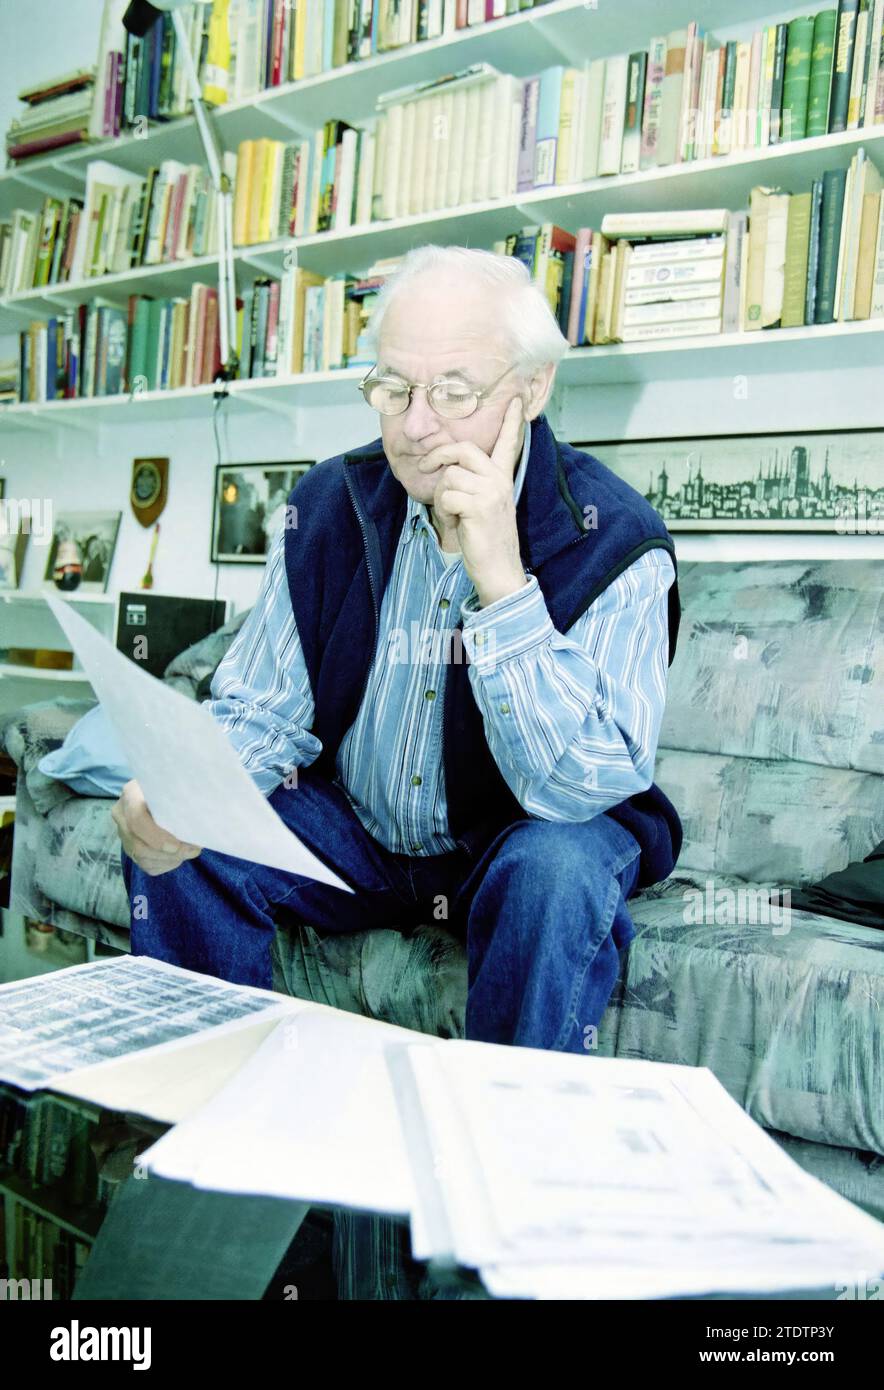 Dirk Verkijk busy with research, 30-01-2001, Whizgle News from the Past, Tailored for the Future. Explore historical narratives, Dutch The Netherlands agency image with a modern perspective, bridging the gap between yesterday's events and tomorrow's insights. A timeless journey shaping the stories that shape our future Stock Photo